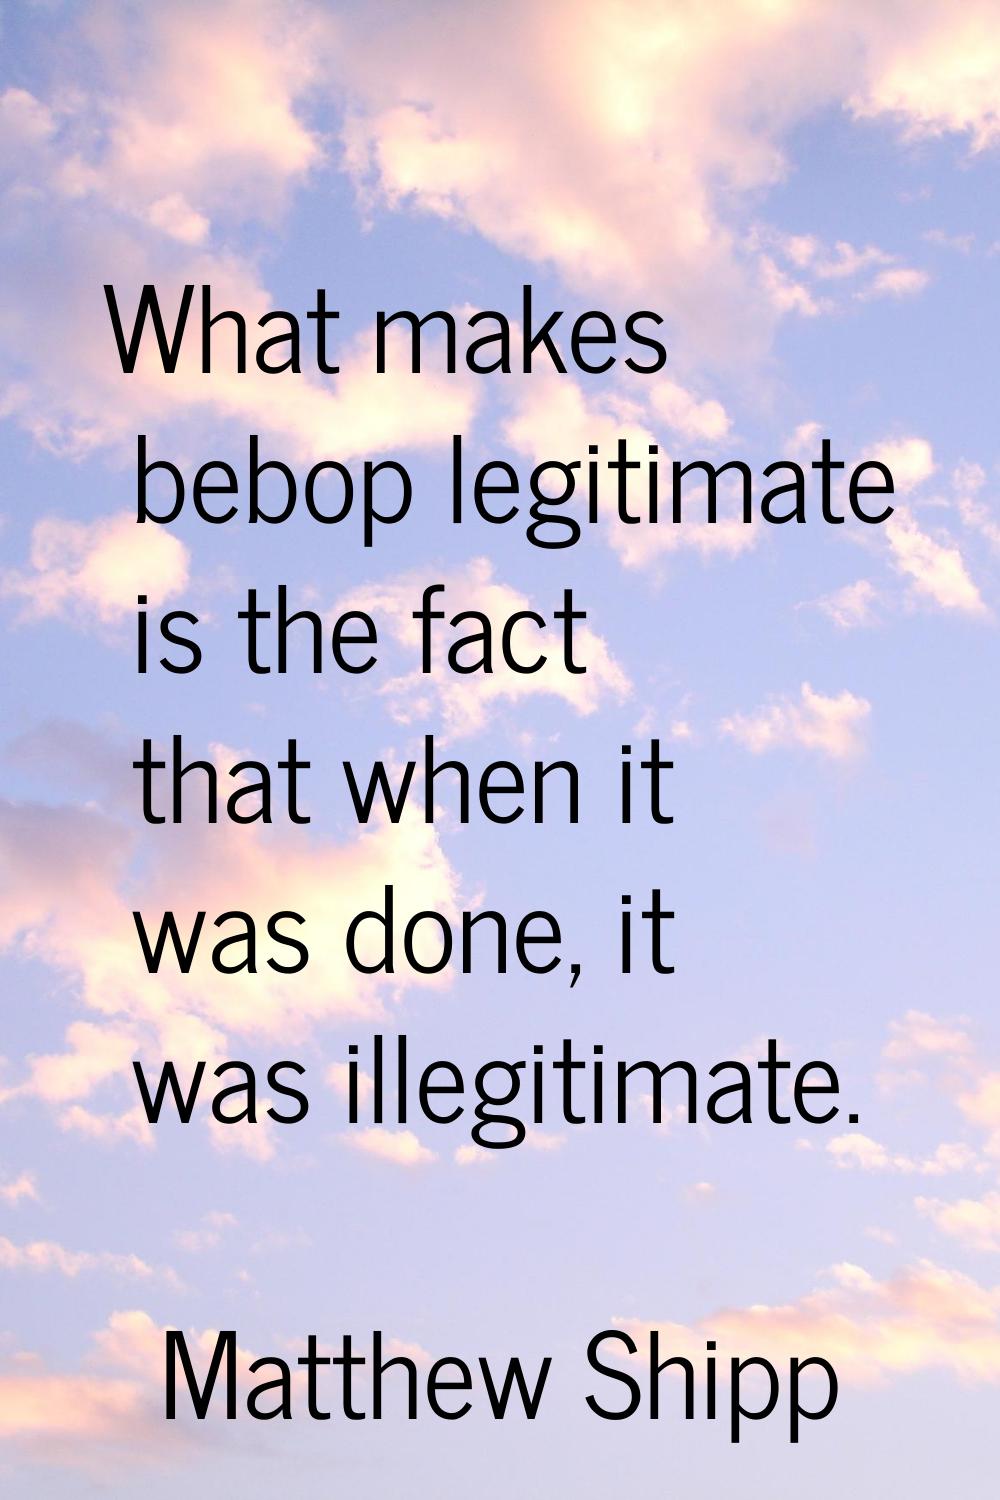 What makes bebop legitimate is the fact that when it was done, it was illegitimate.